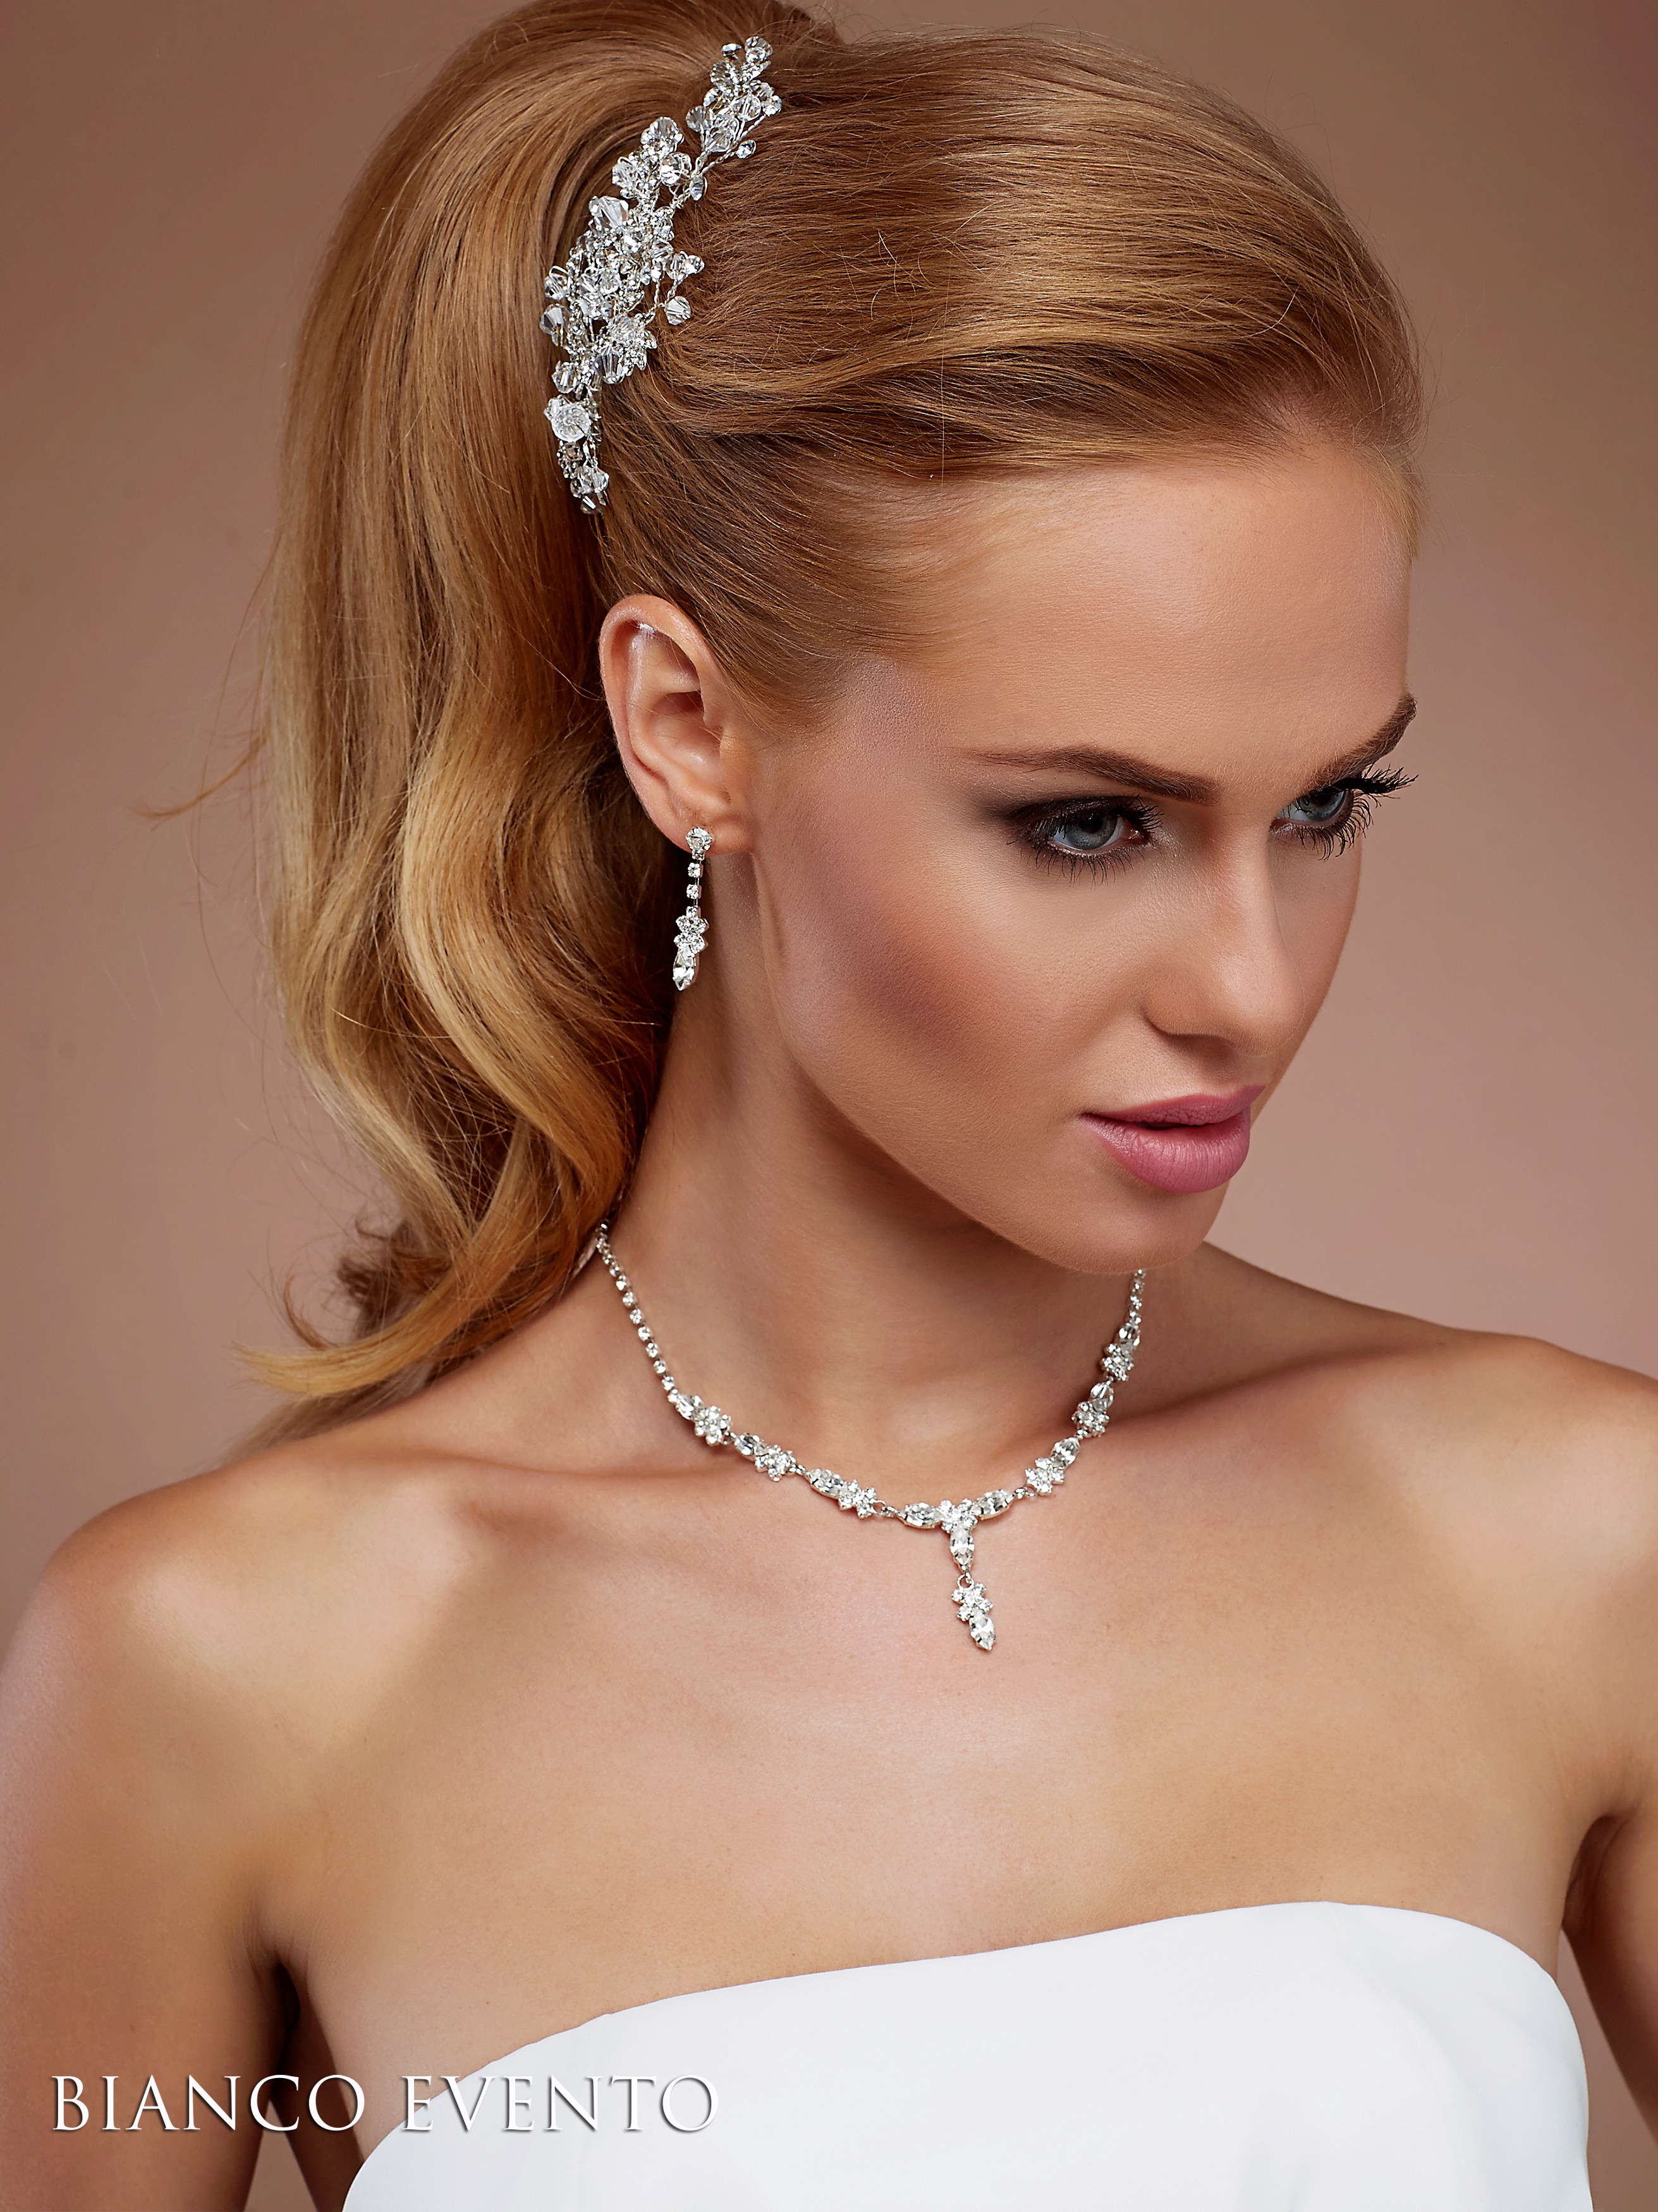 Coiffe strass pour coiffure mariage